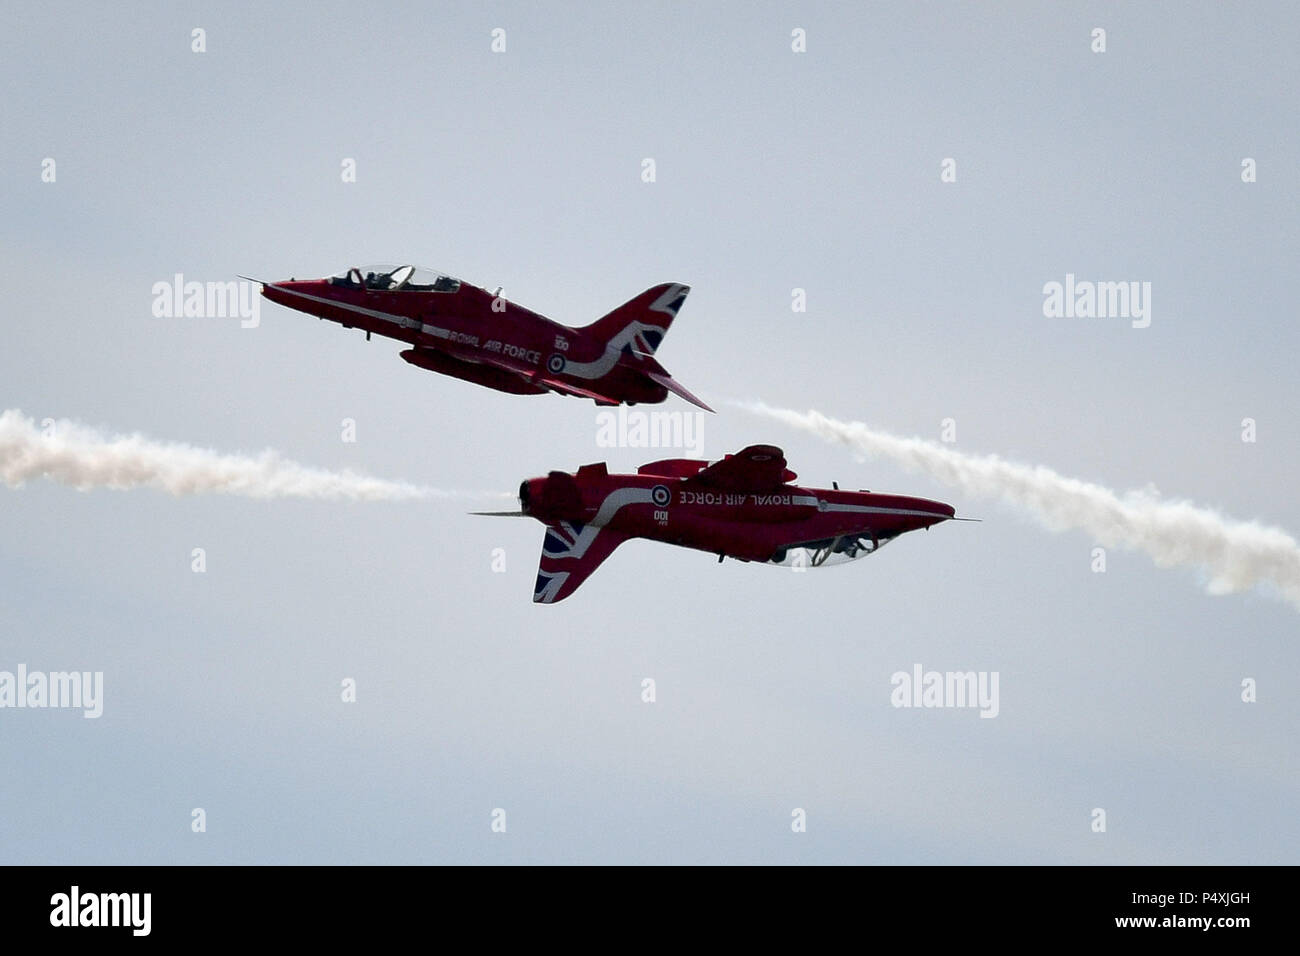 The Red Arrows perform during the Weston Air Festival at Weston Bay, Weston-super-Mare. Stock Photo